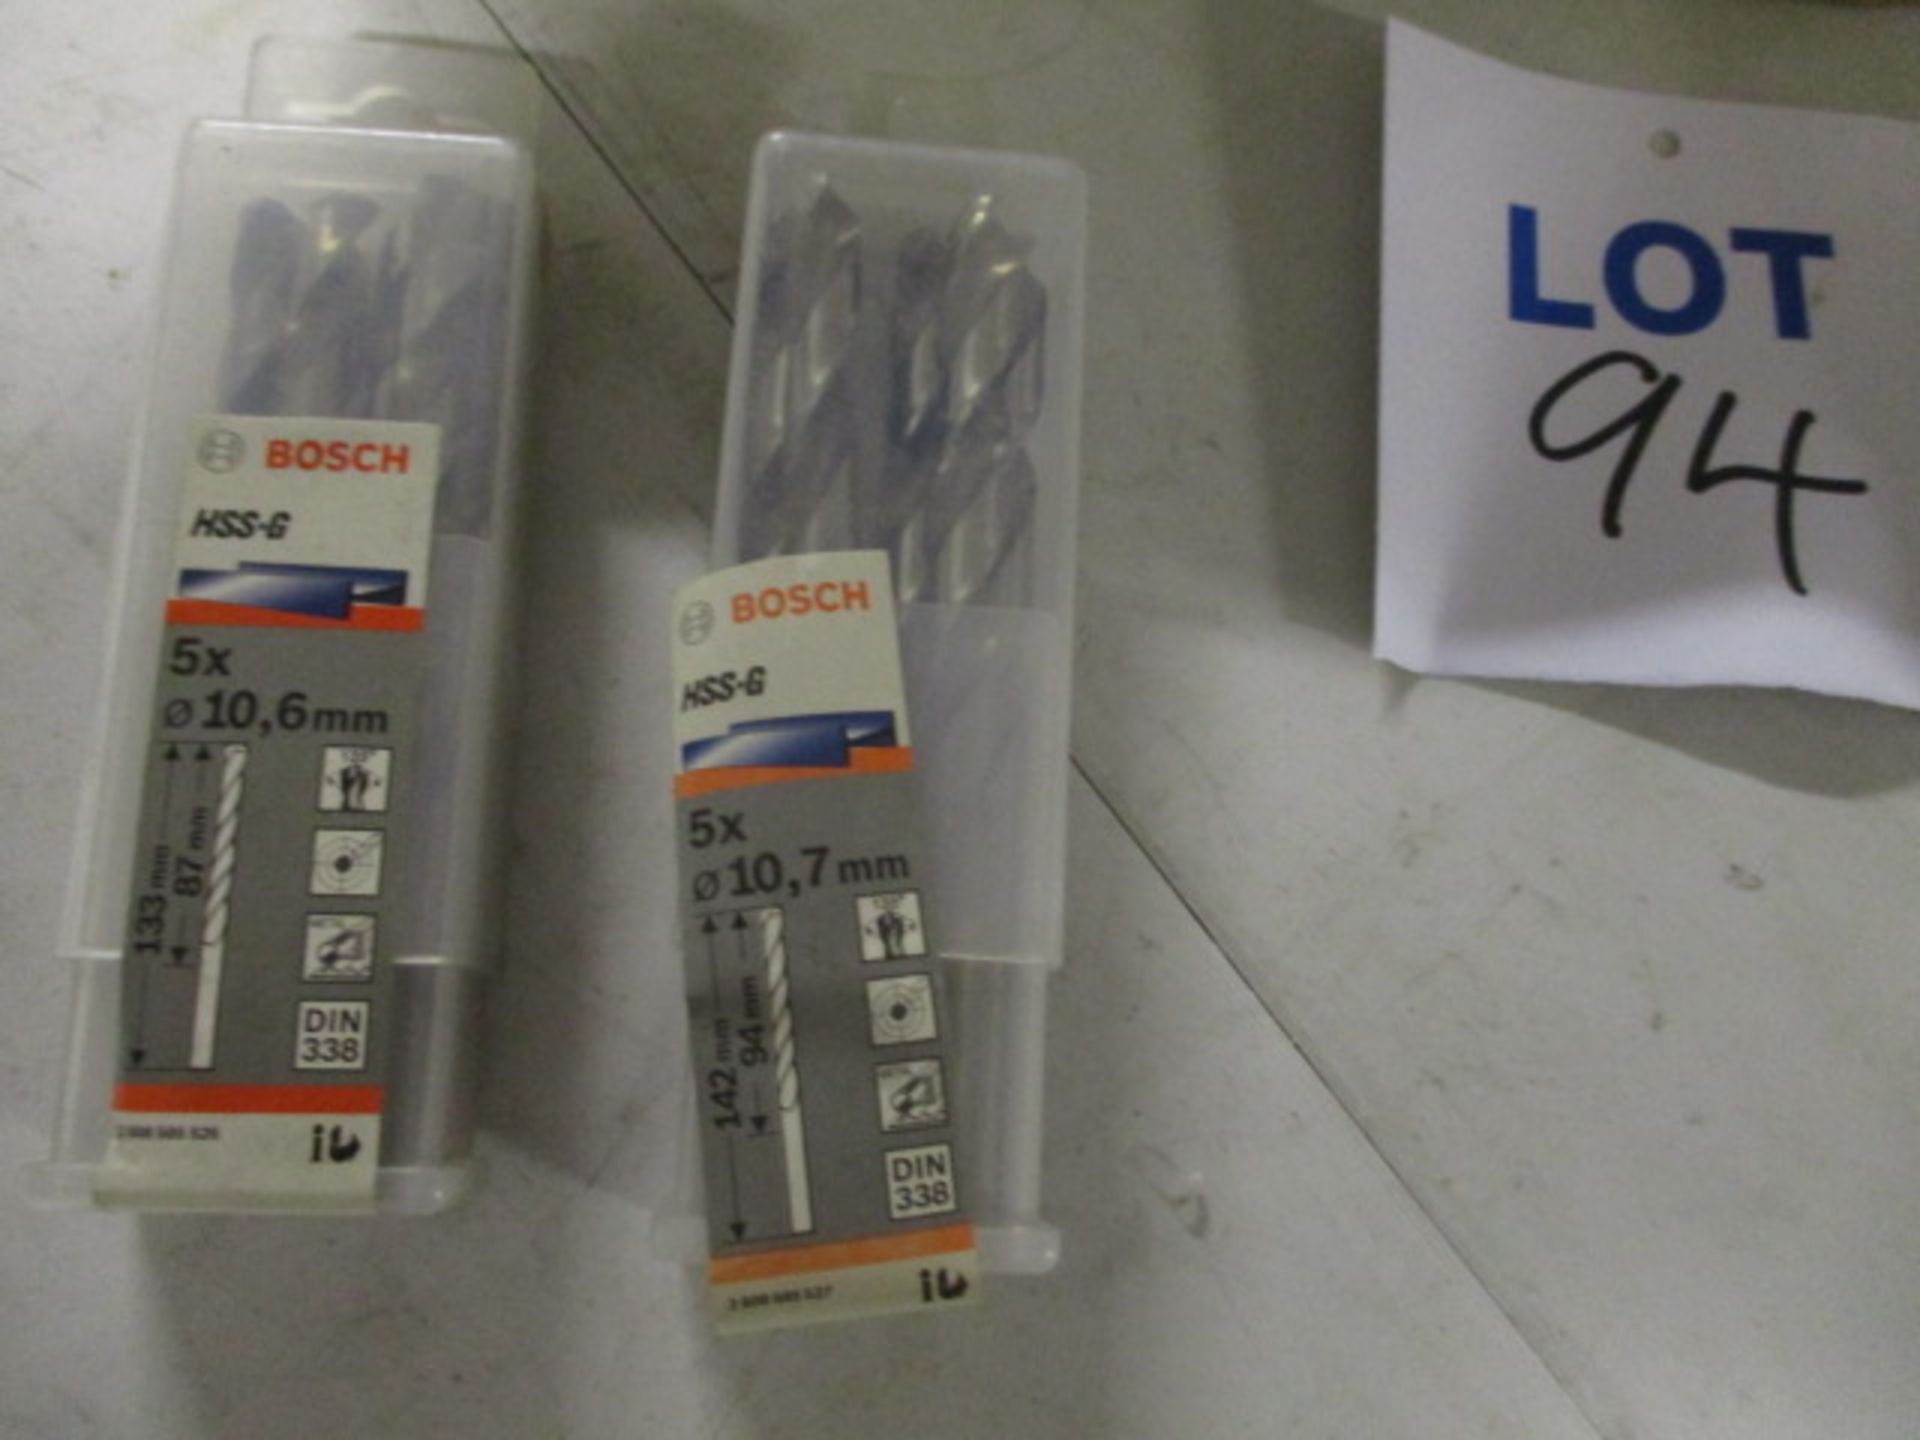 (40) Assorted Bosch HSS-G, D338 Jobber Drills; Retail packed (Unused) - Image 3 of 3